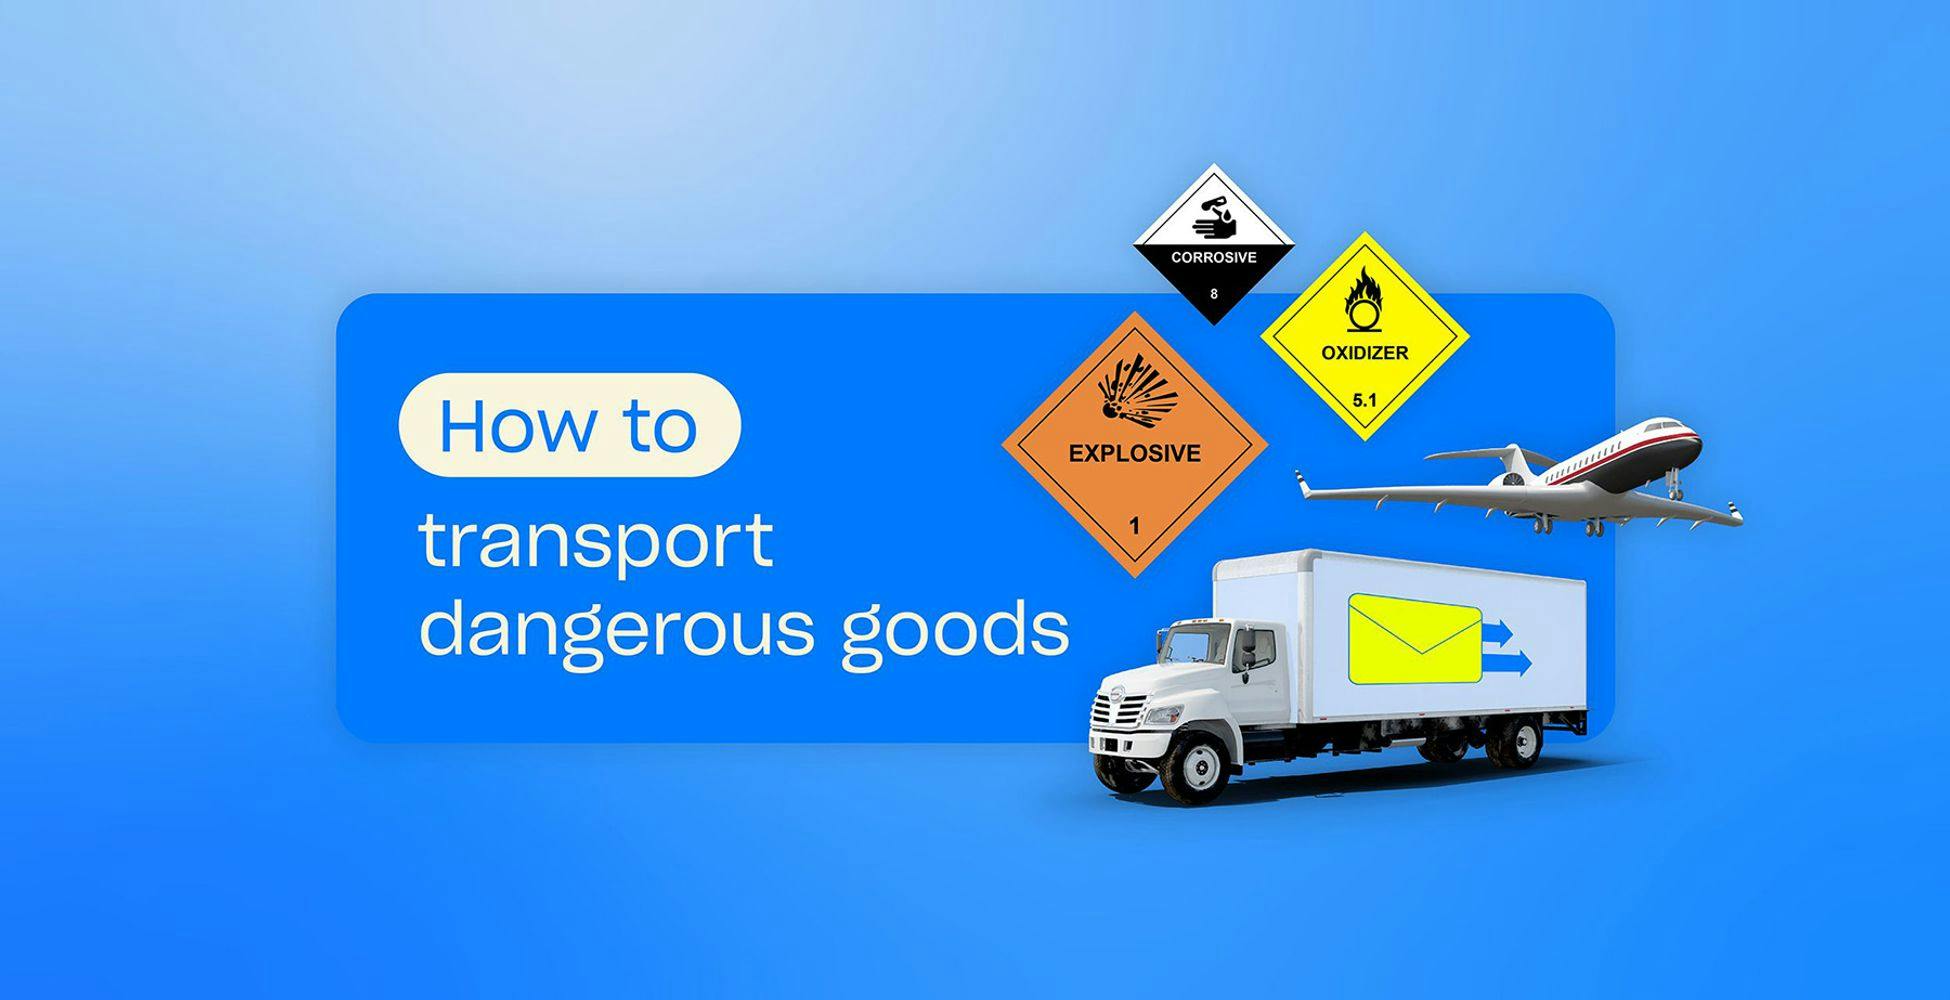 how to transport dangerous goods header image, with truck, plane and class tiles